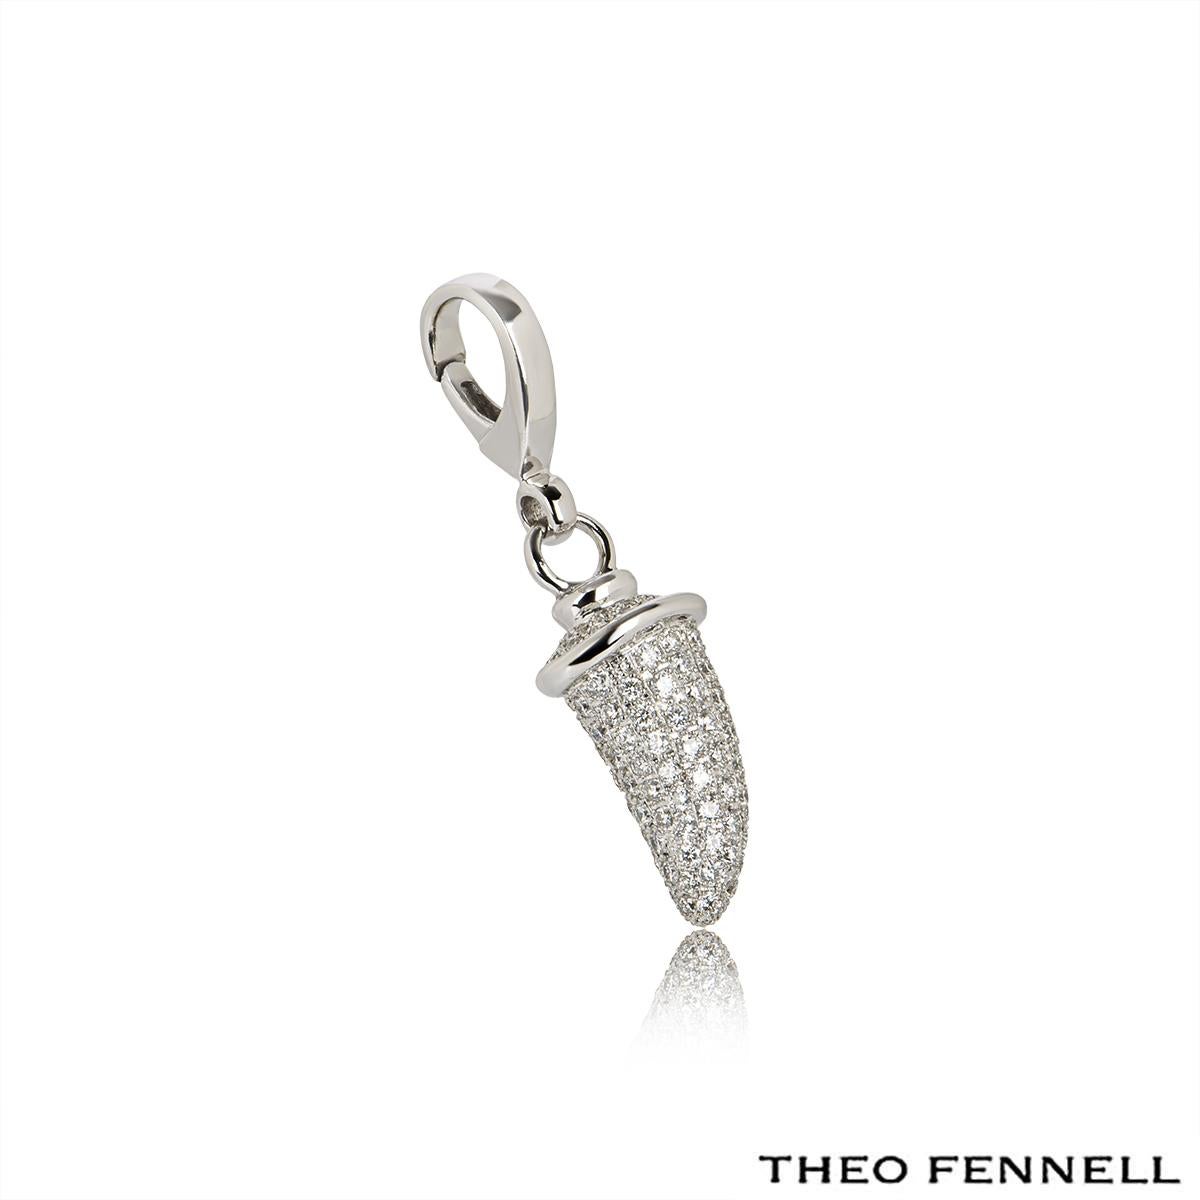 An 18k white gold diamond horn charm by Theo Fennell. The charm is pave set with round brilliant cut diamonds and features a lobster style clasp. It has a gross weight of 3.10 grams and a height of 2.1cm.

The charm comes complete with a